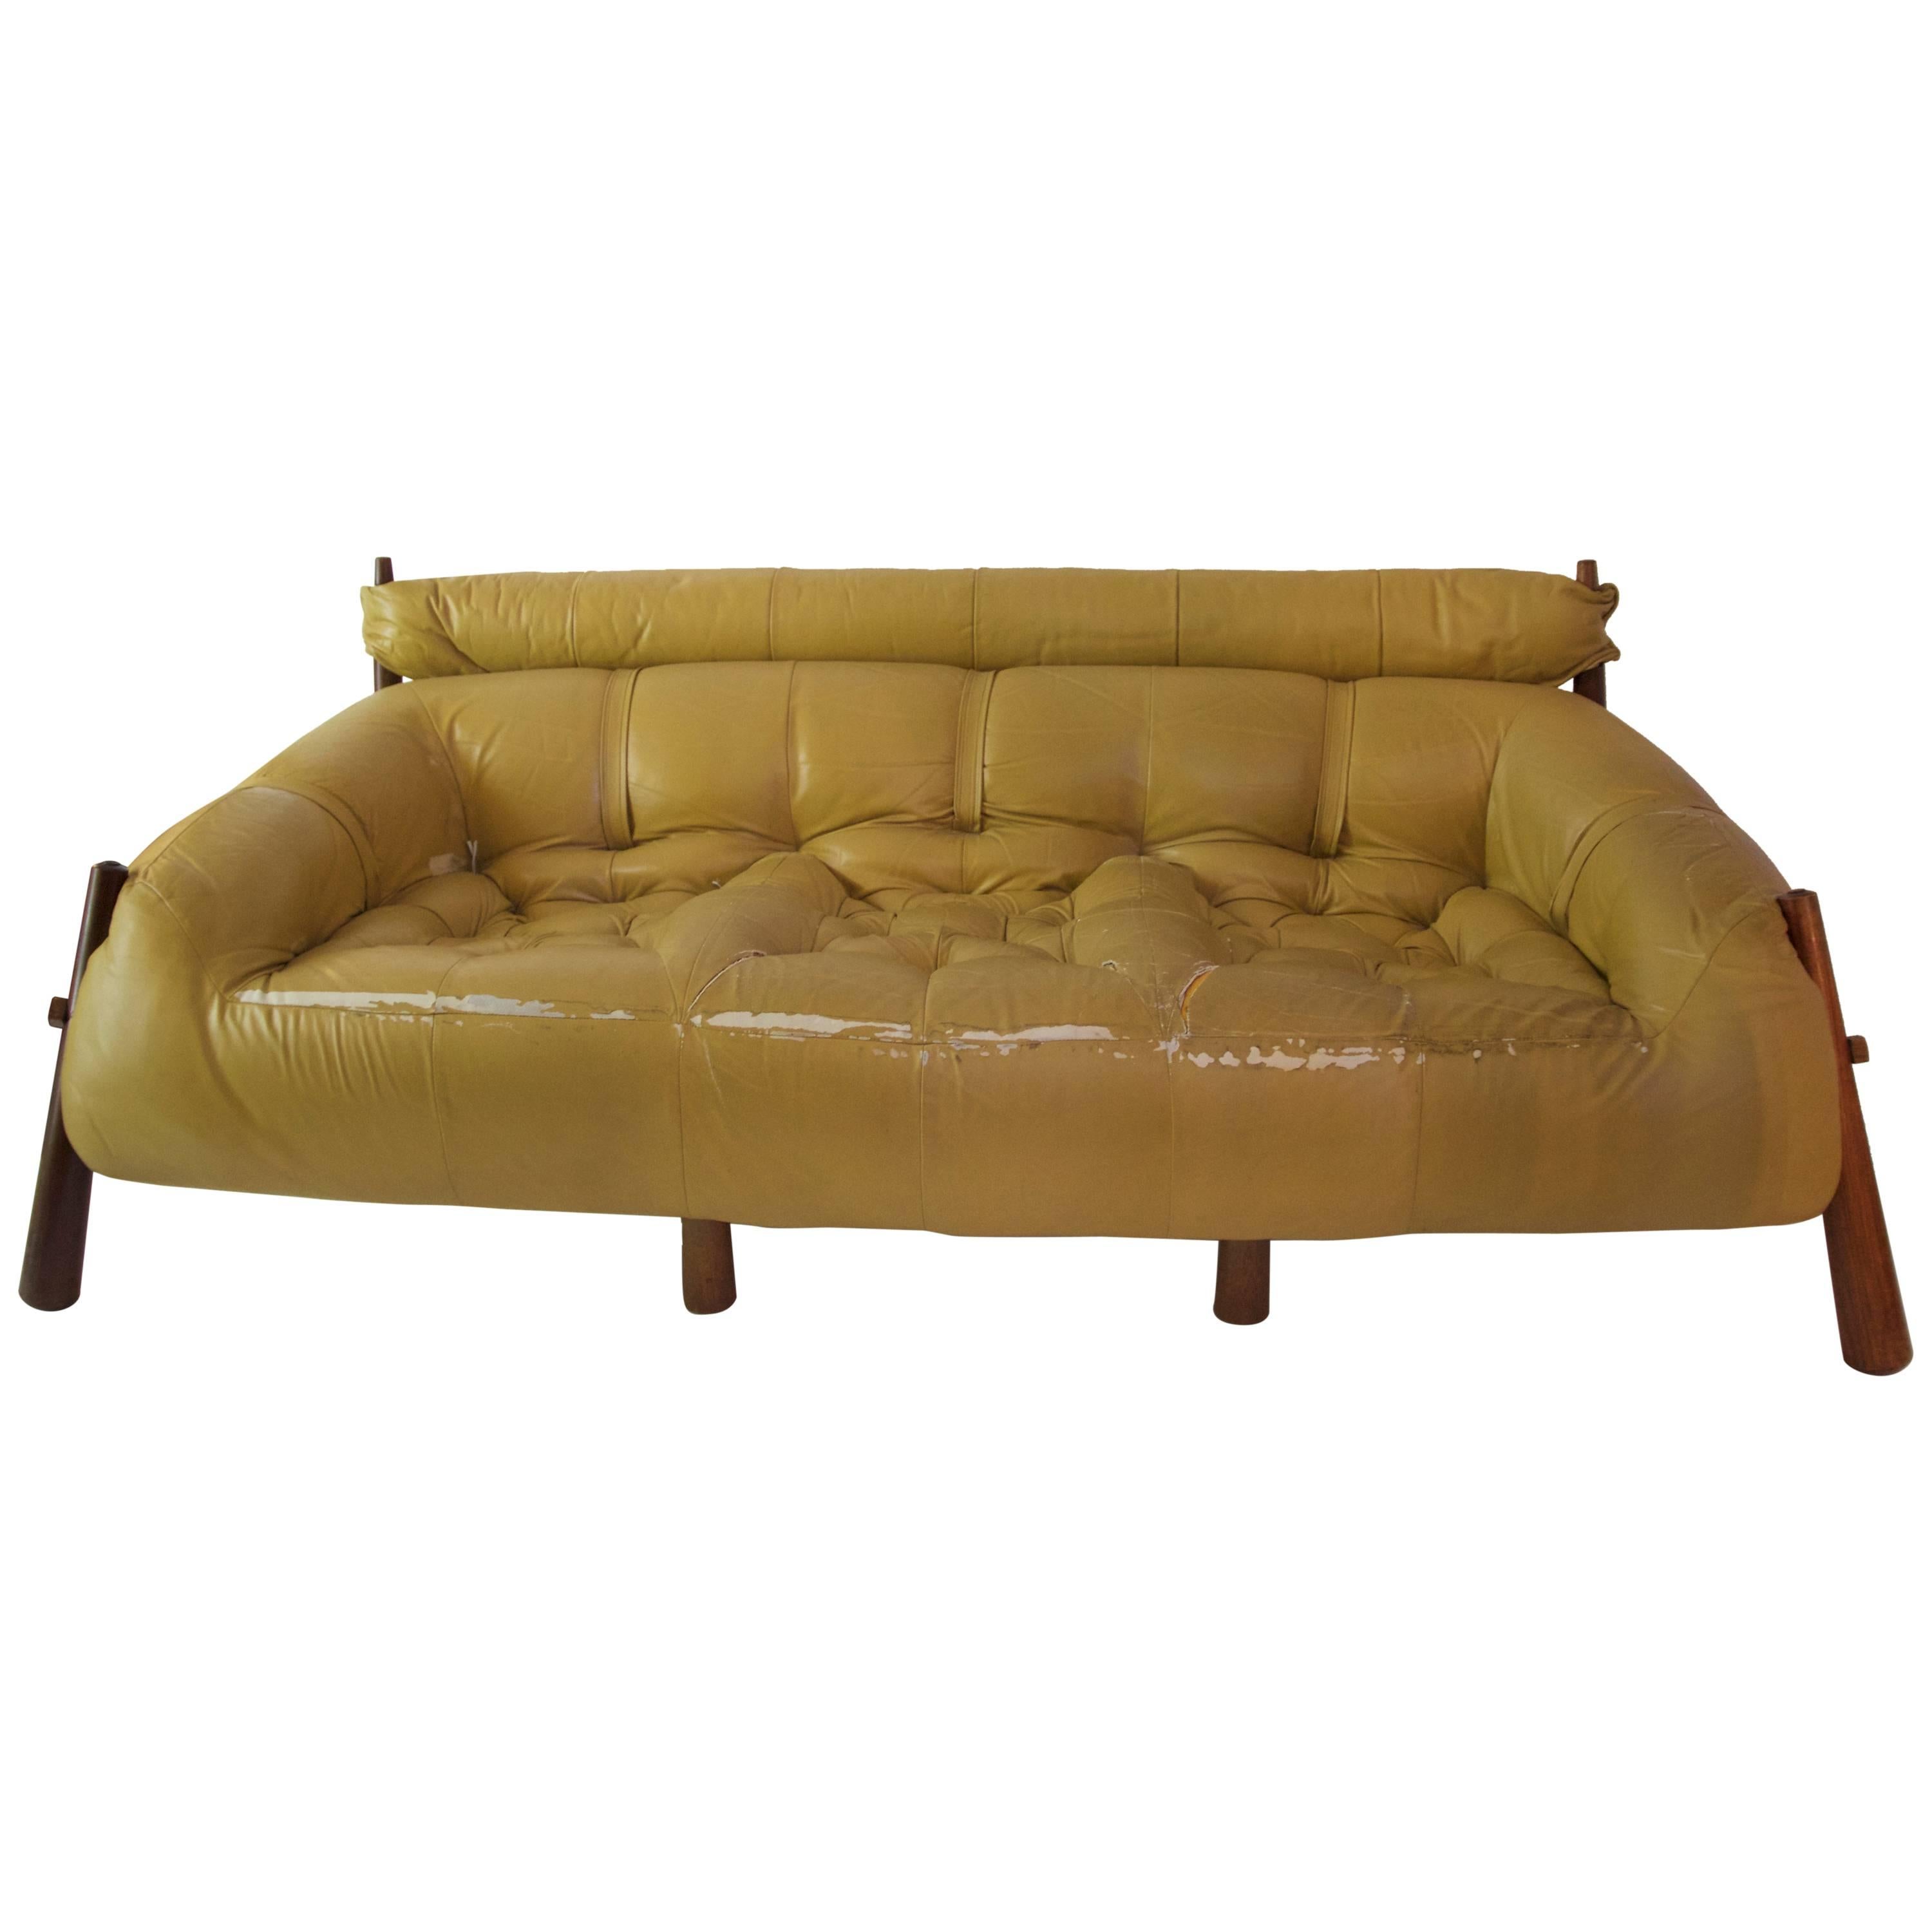 Percival Lafer, Sofa, Wooden and Leather Base, circa 1958, Brazil